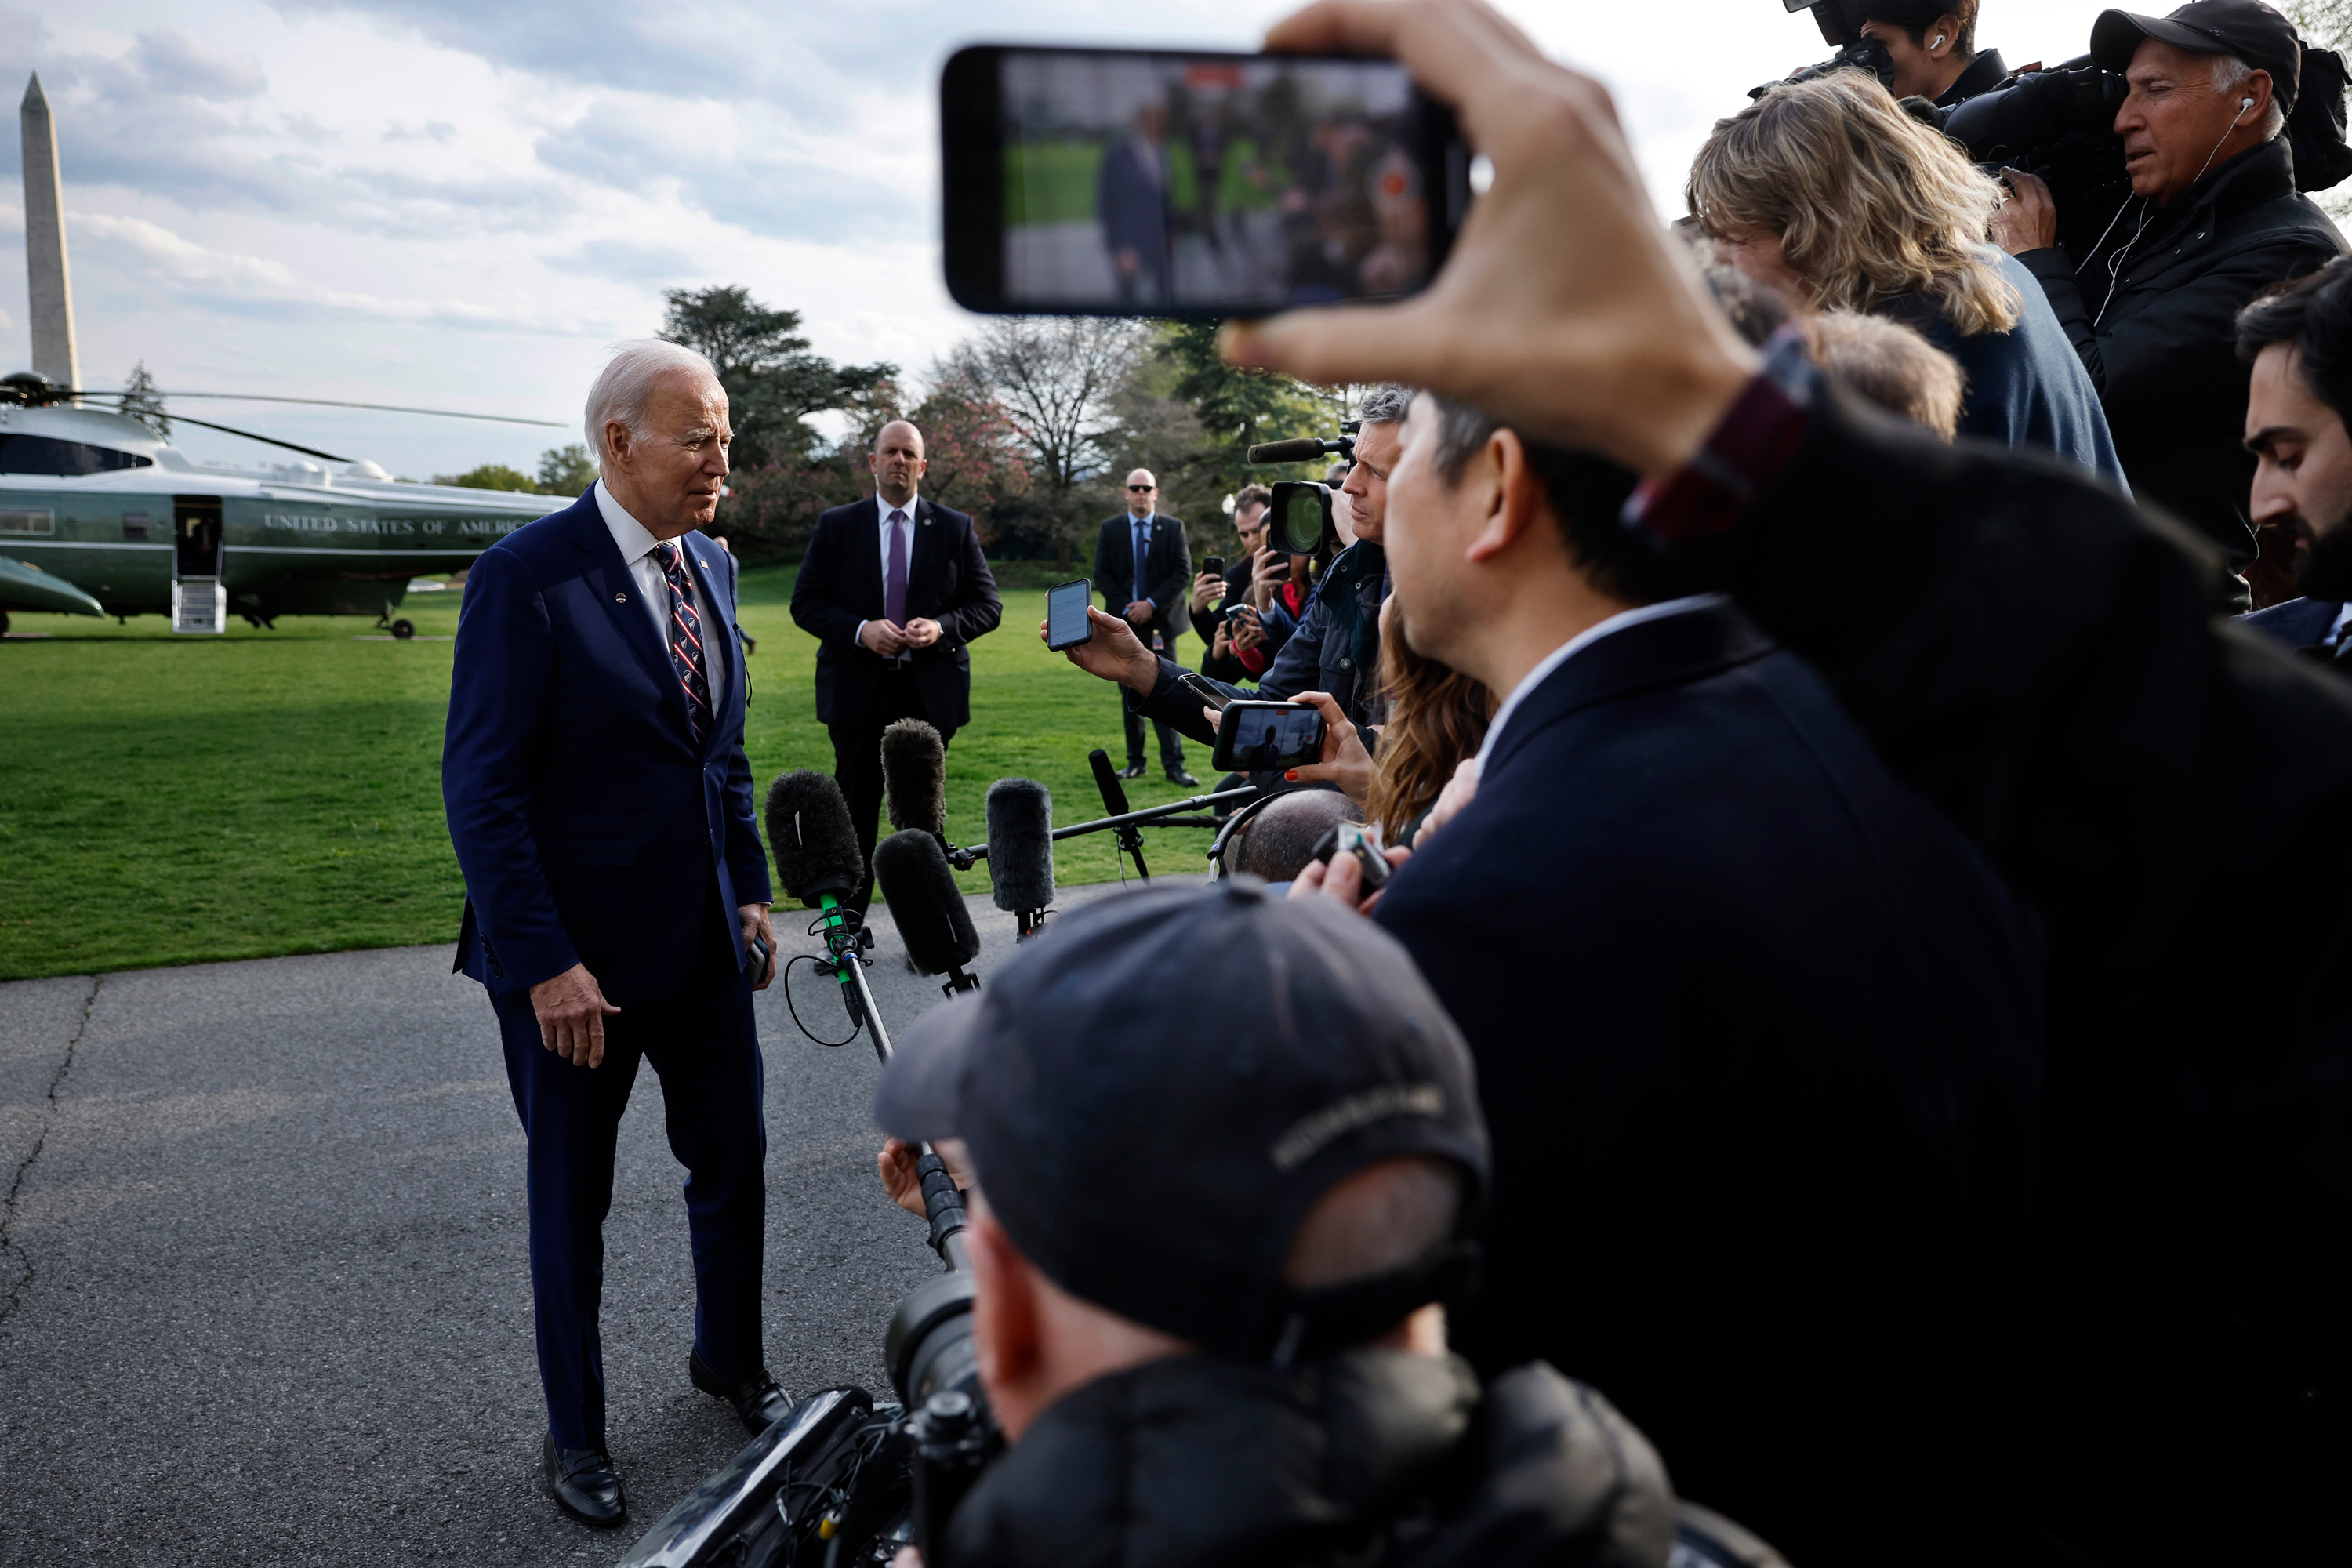 President Joe Biden briefly speaks with reporters as he returns to the White House in Washington, DC, on Tuesday.